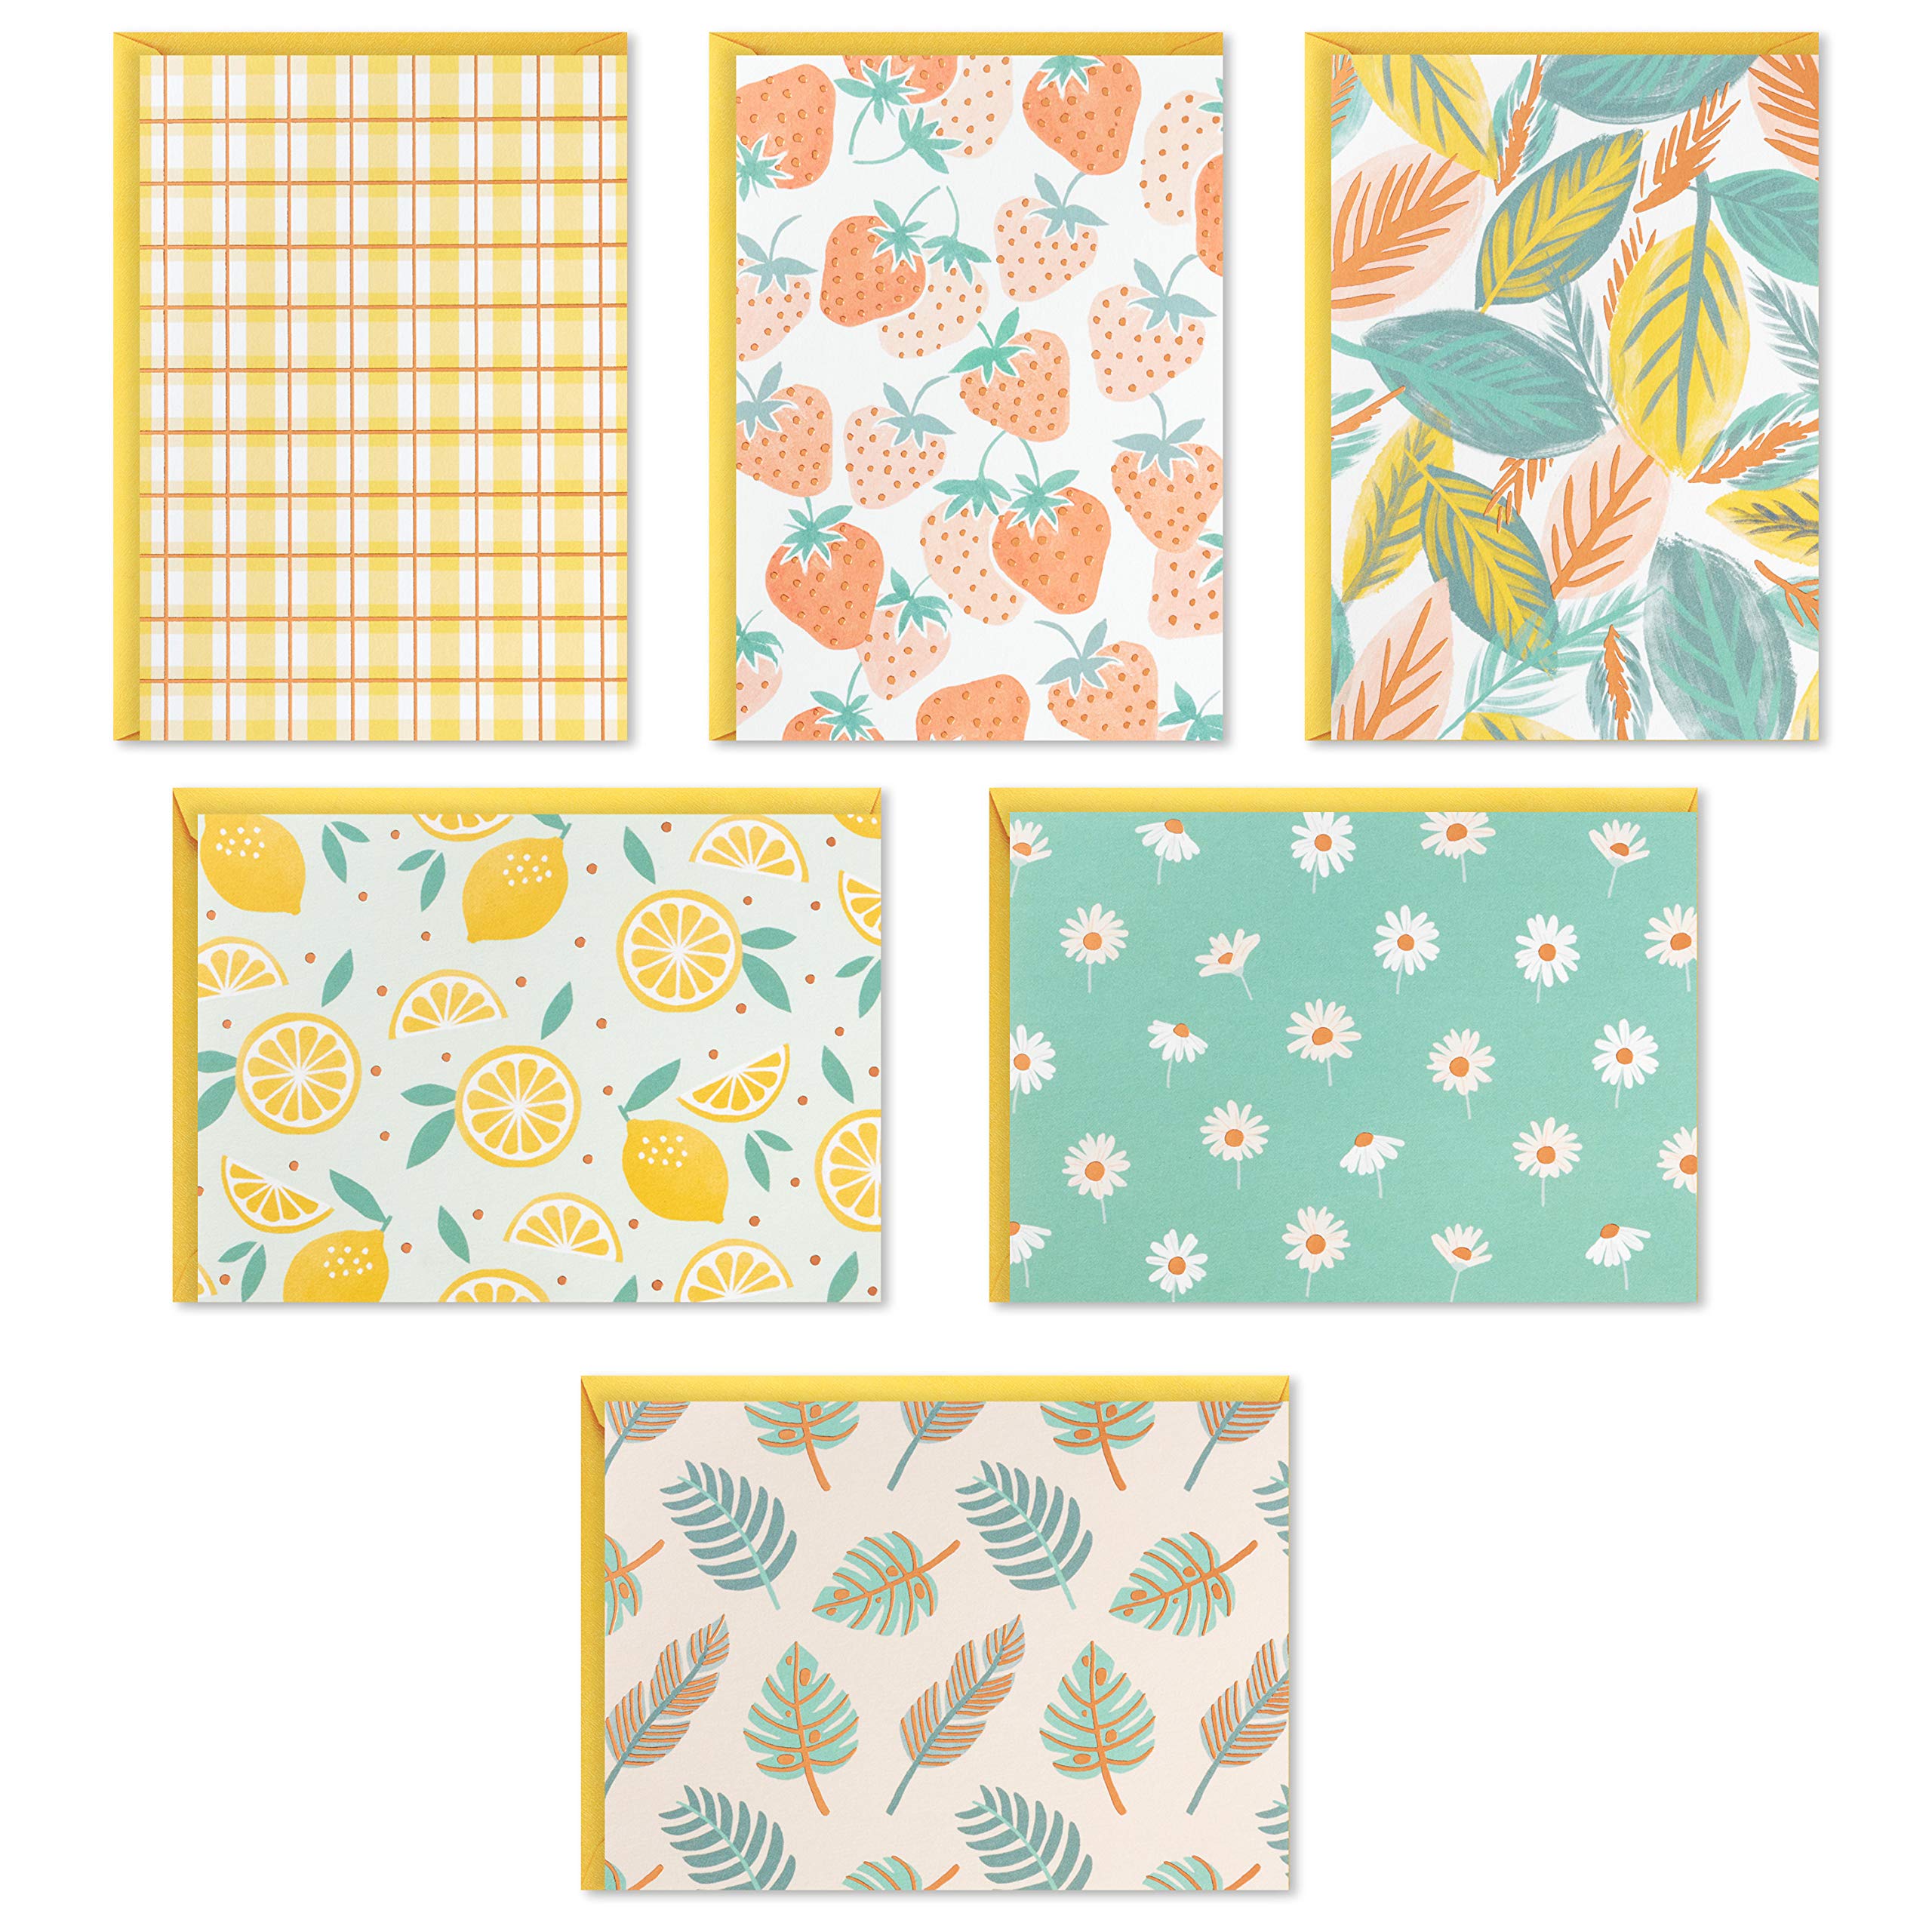 Hallmark Blank Cards Assortment, 24 Cards with Envelopes (Citrus, Greenery, Gingham, Strawberries) & Peanuts Blank Cards Assortment, 70th Anniversary (40 Note Cards with Envelopes)